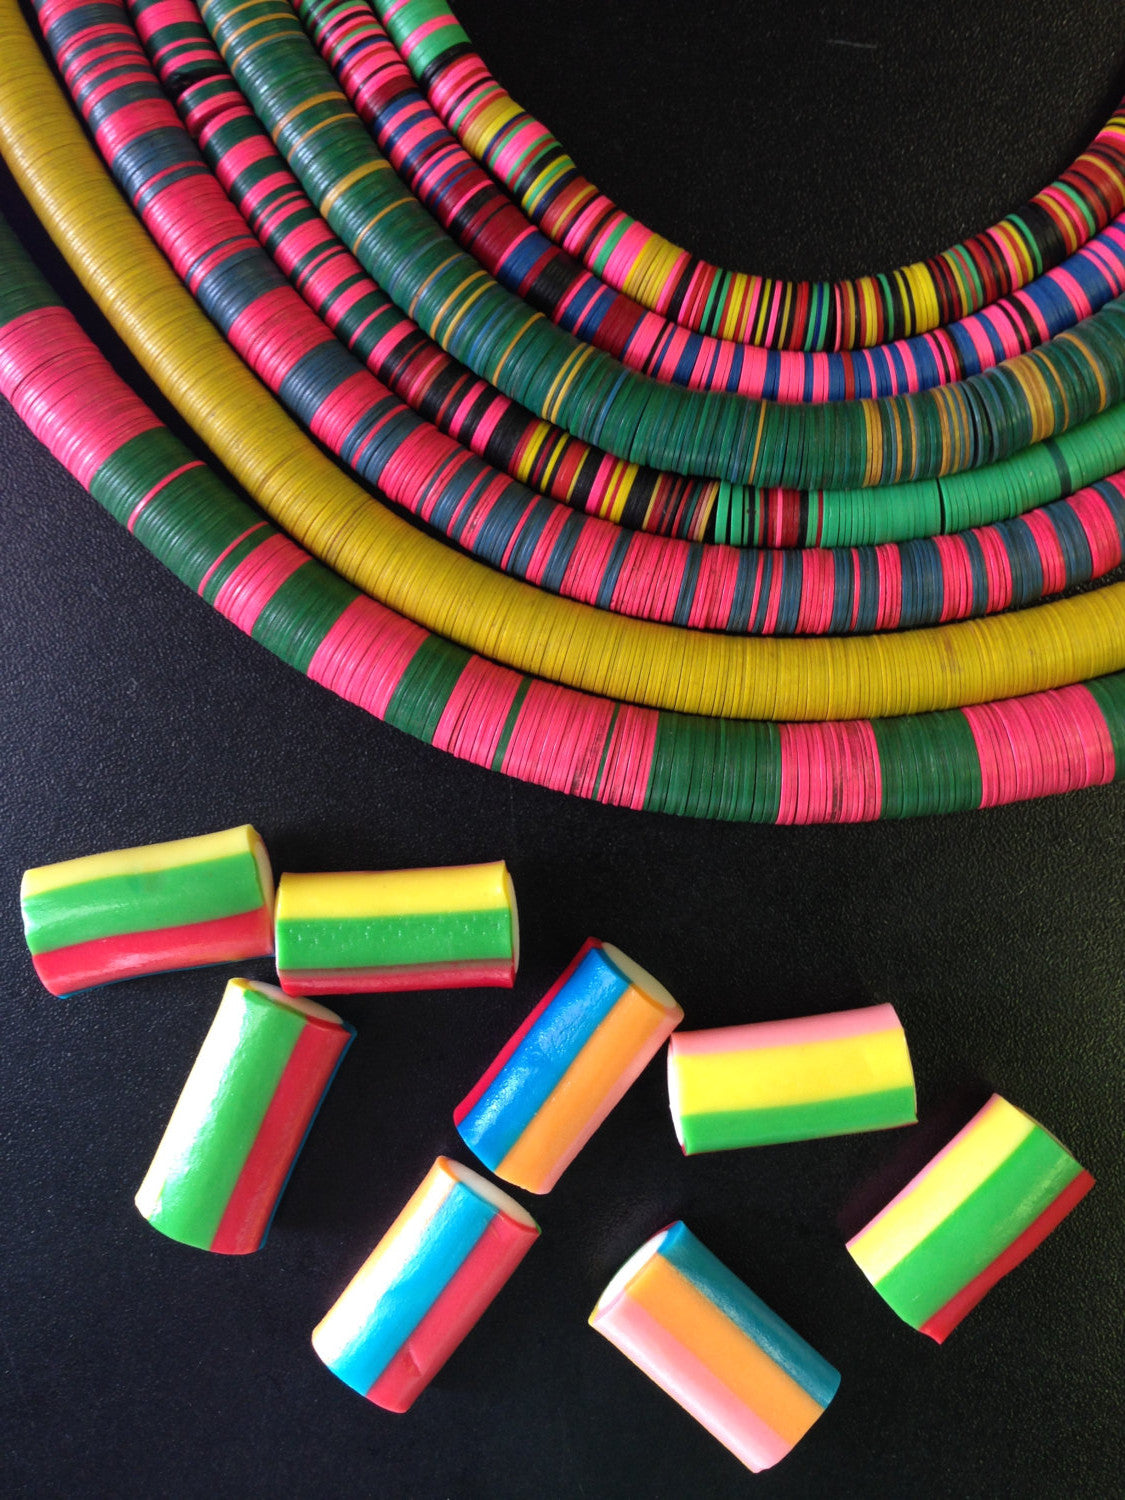 Wholesale Listing: Vintage African Vinyl Record Disc Beads, You Choose which 6 strands / Tribal Wholesale Jewelry Making Supplies, Heishi - ShopWomanShopsWorld.com. Bone Beads, Tassels, Pom Poms, African Beads.